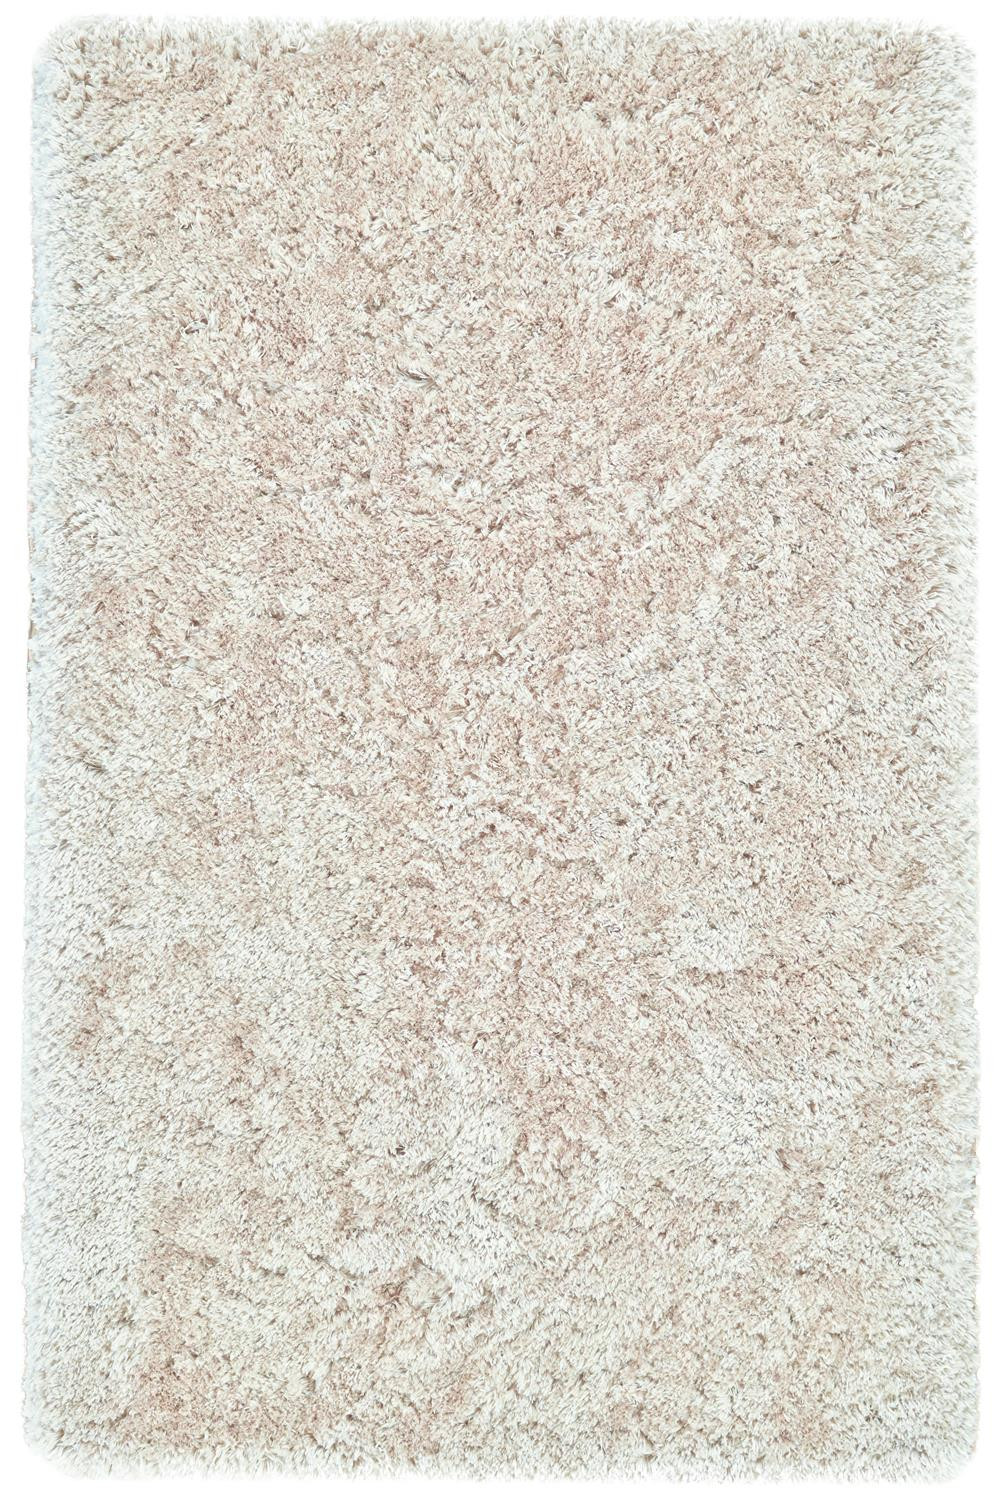 5' X 8' Tan And Taupe Shag Tufted Handmade Stain Resistant Area Rug-511138-1